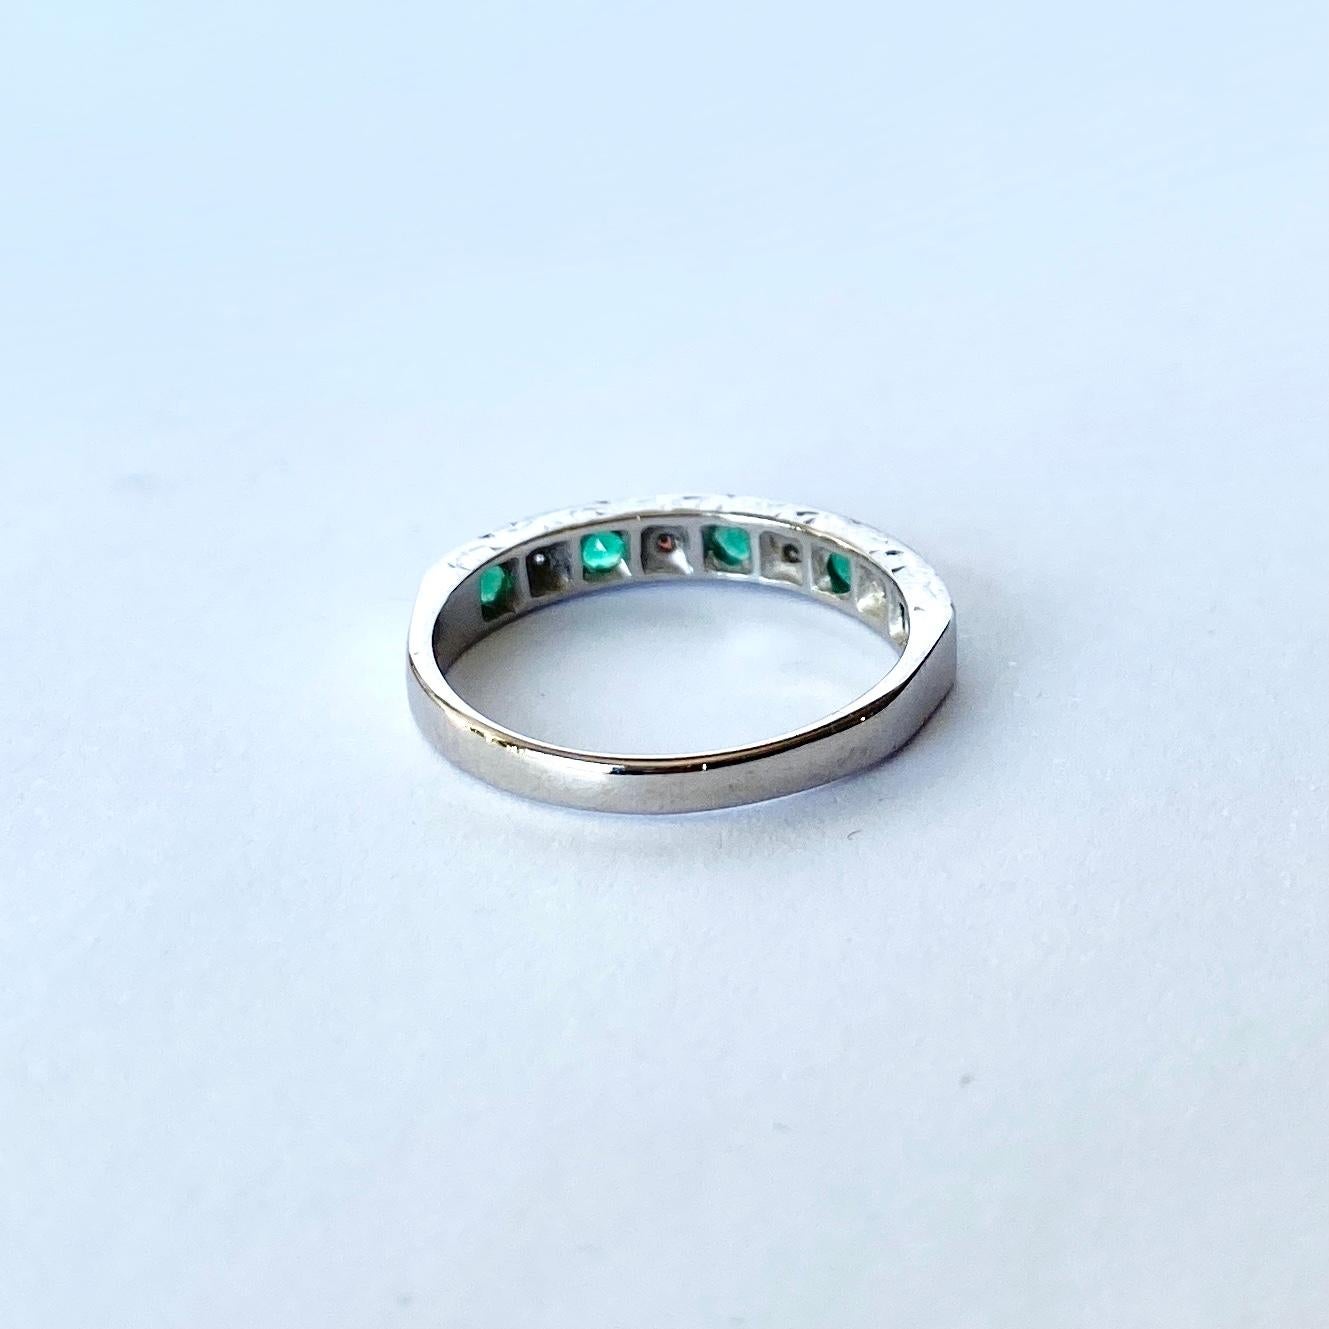 The emeralds in this ring are beautiful and bright and measure 5pts each. In between the gorgeous green stones are diamonds which measure 2pts each. The ring is modelled in 9carat white gold.

Ring Size: K 1/2 or 5 1/2 
Band Width: 3.5mm

Weight: